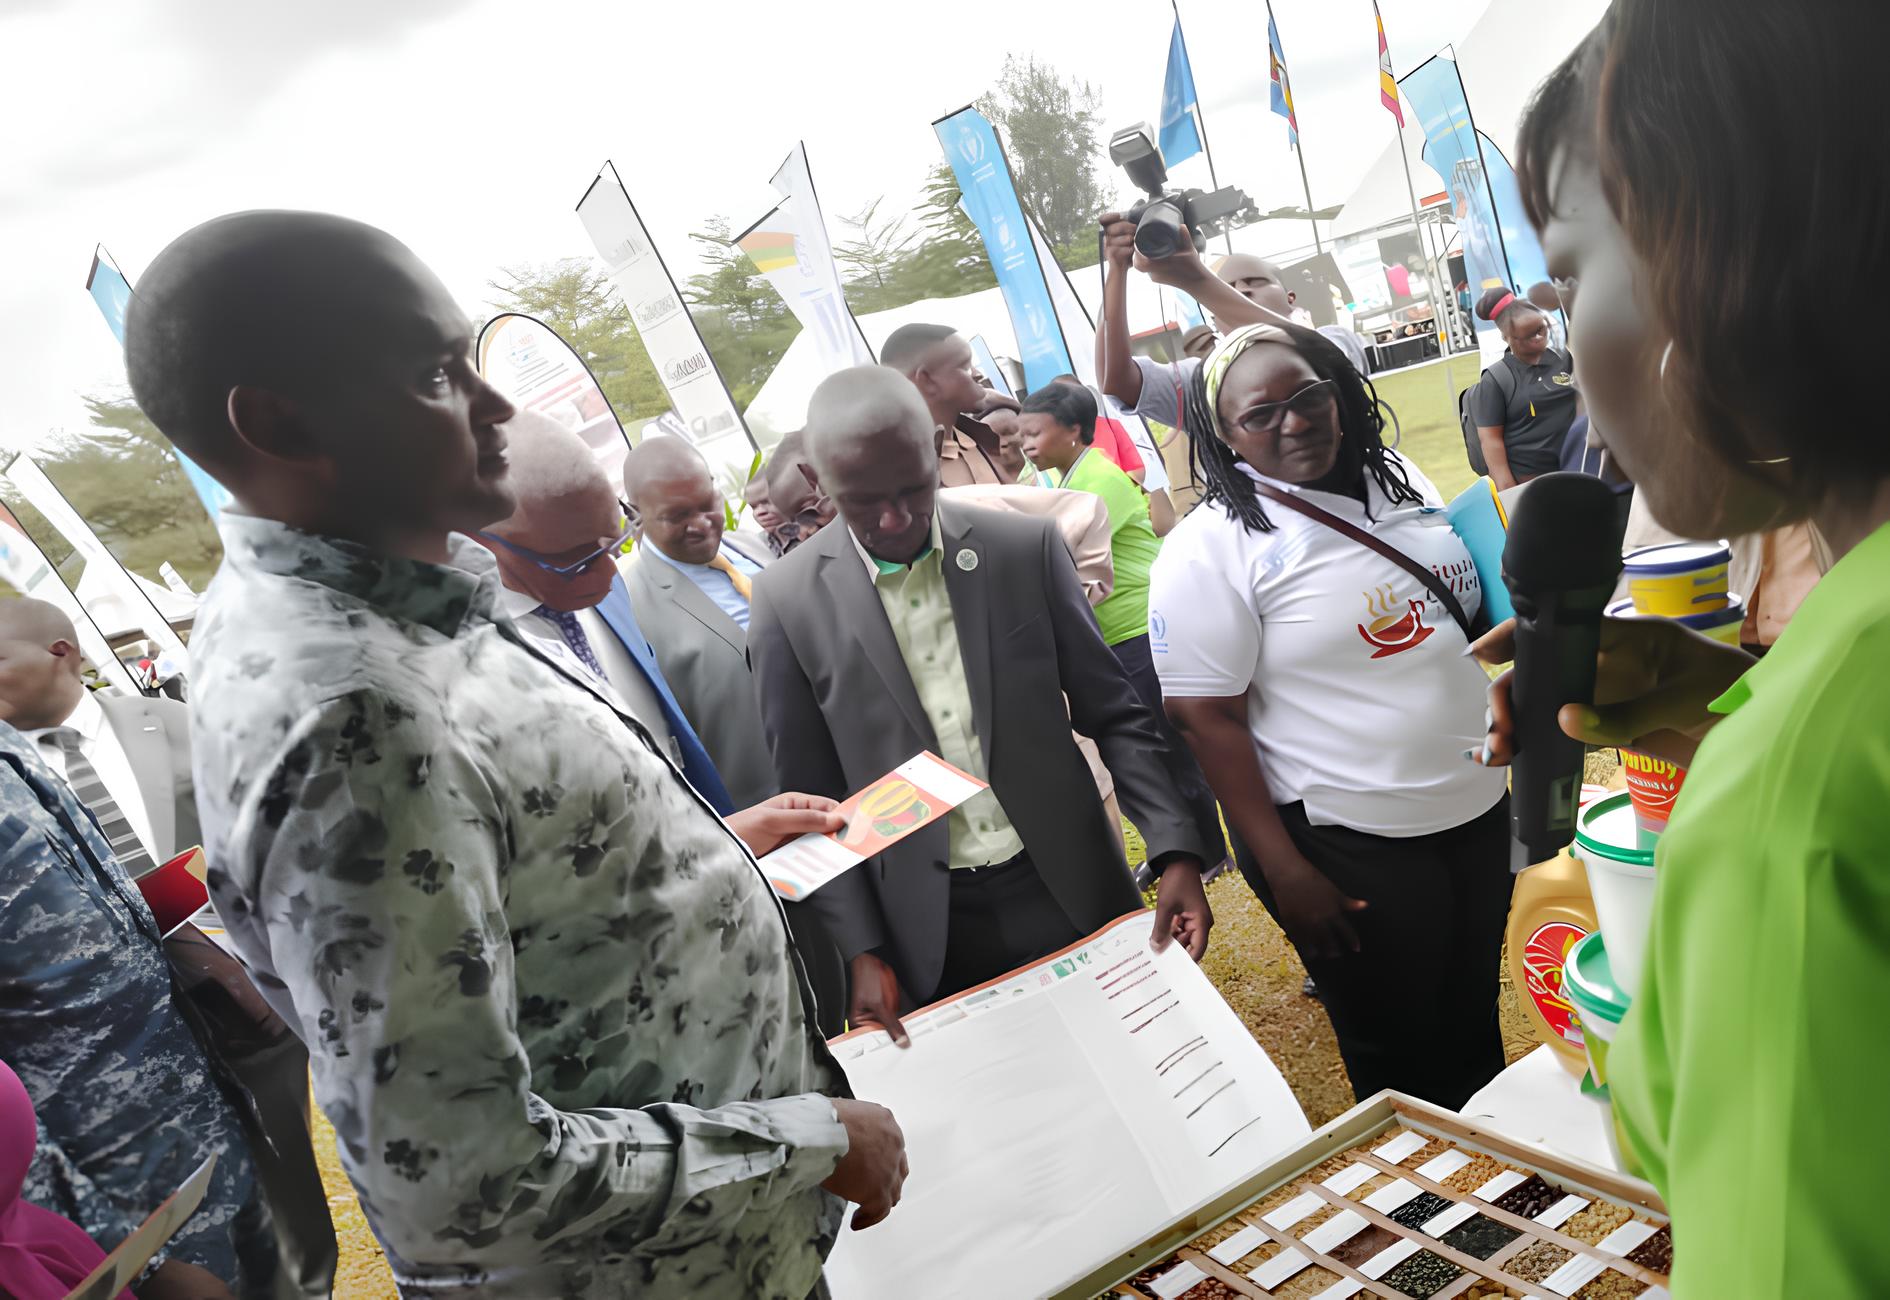 The Minister of Agriculture visits the National Genebank stall